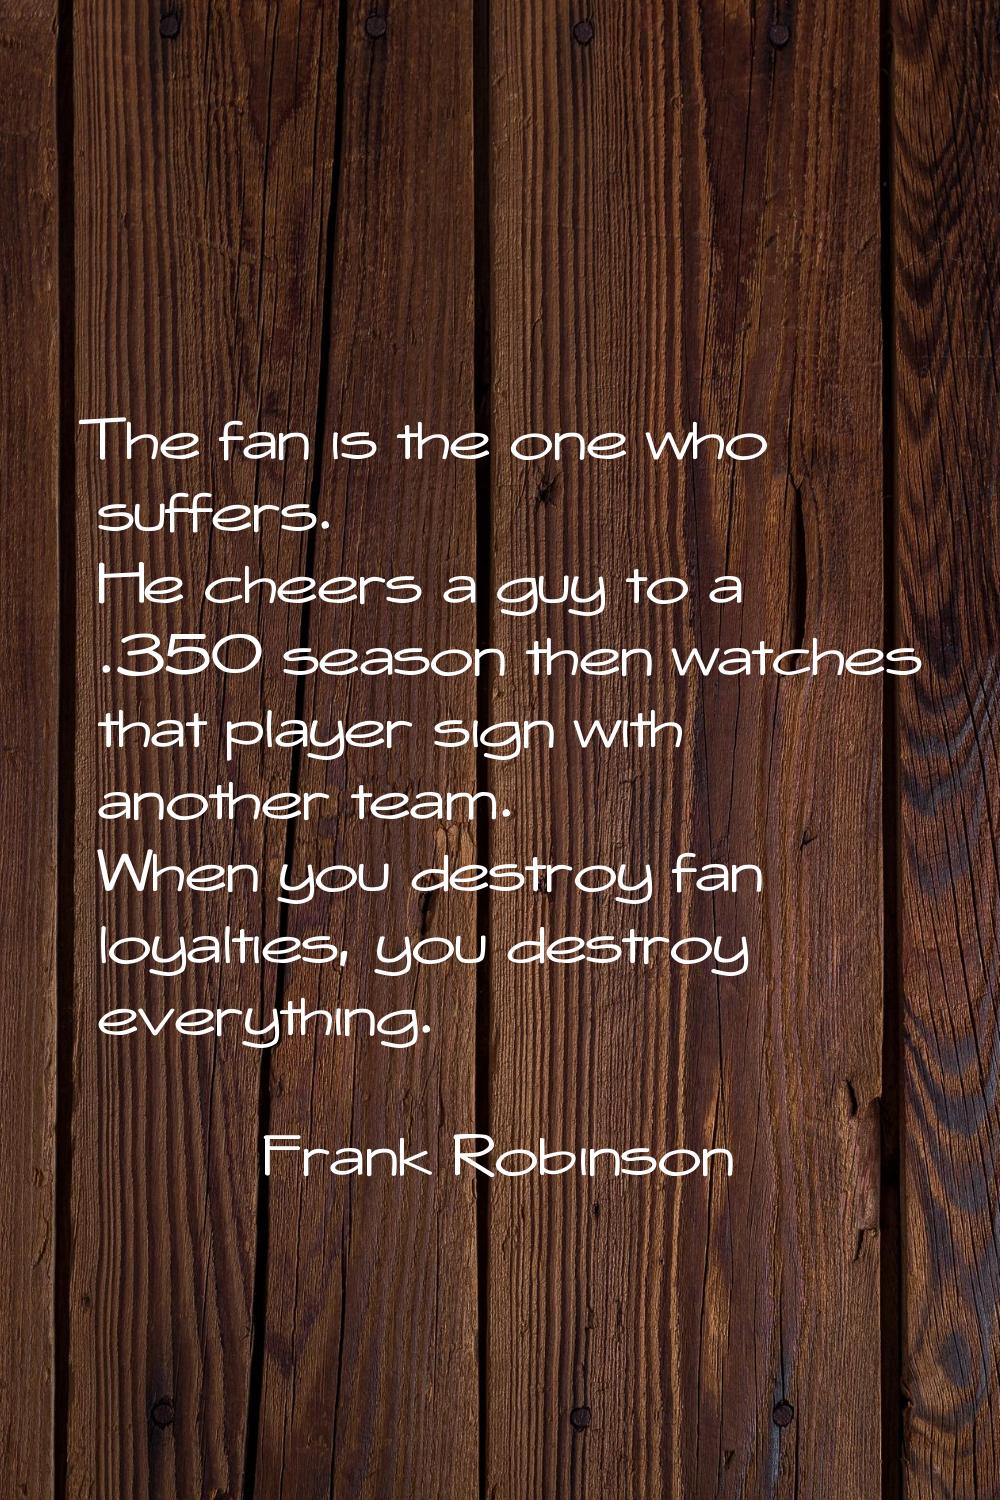 The fan is the one who suffers. He cheers a guy to a .350 season then watches that player sign with